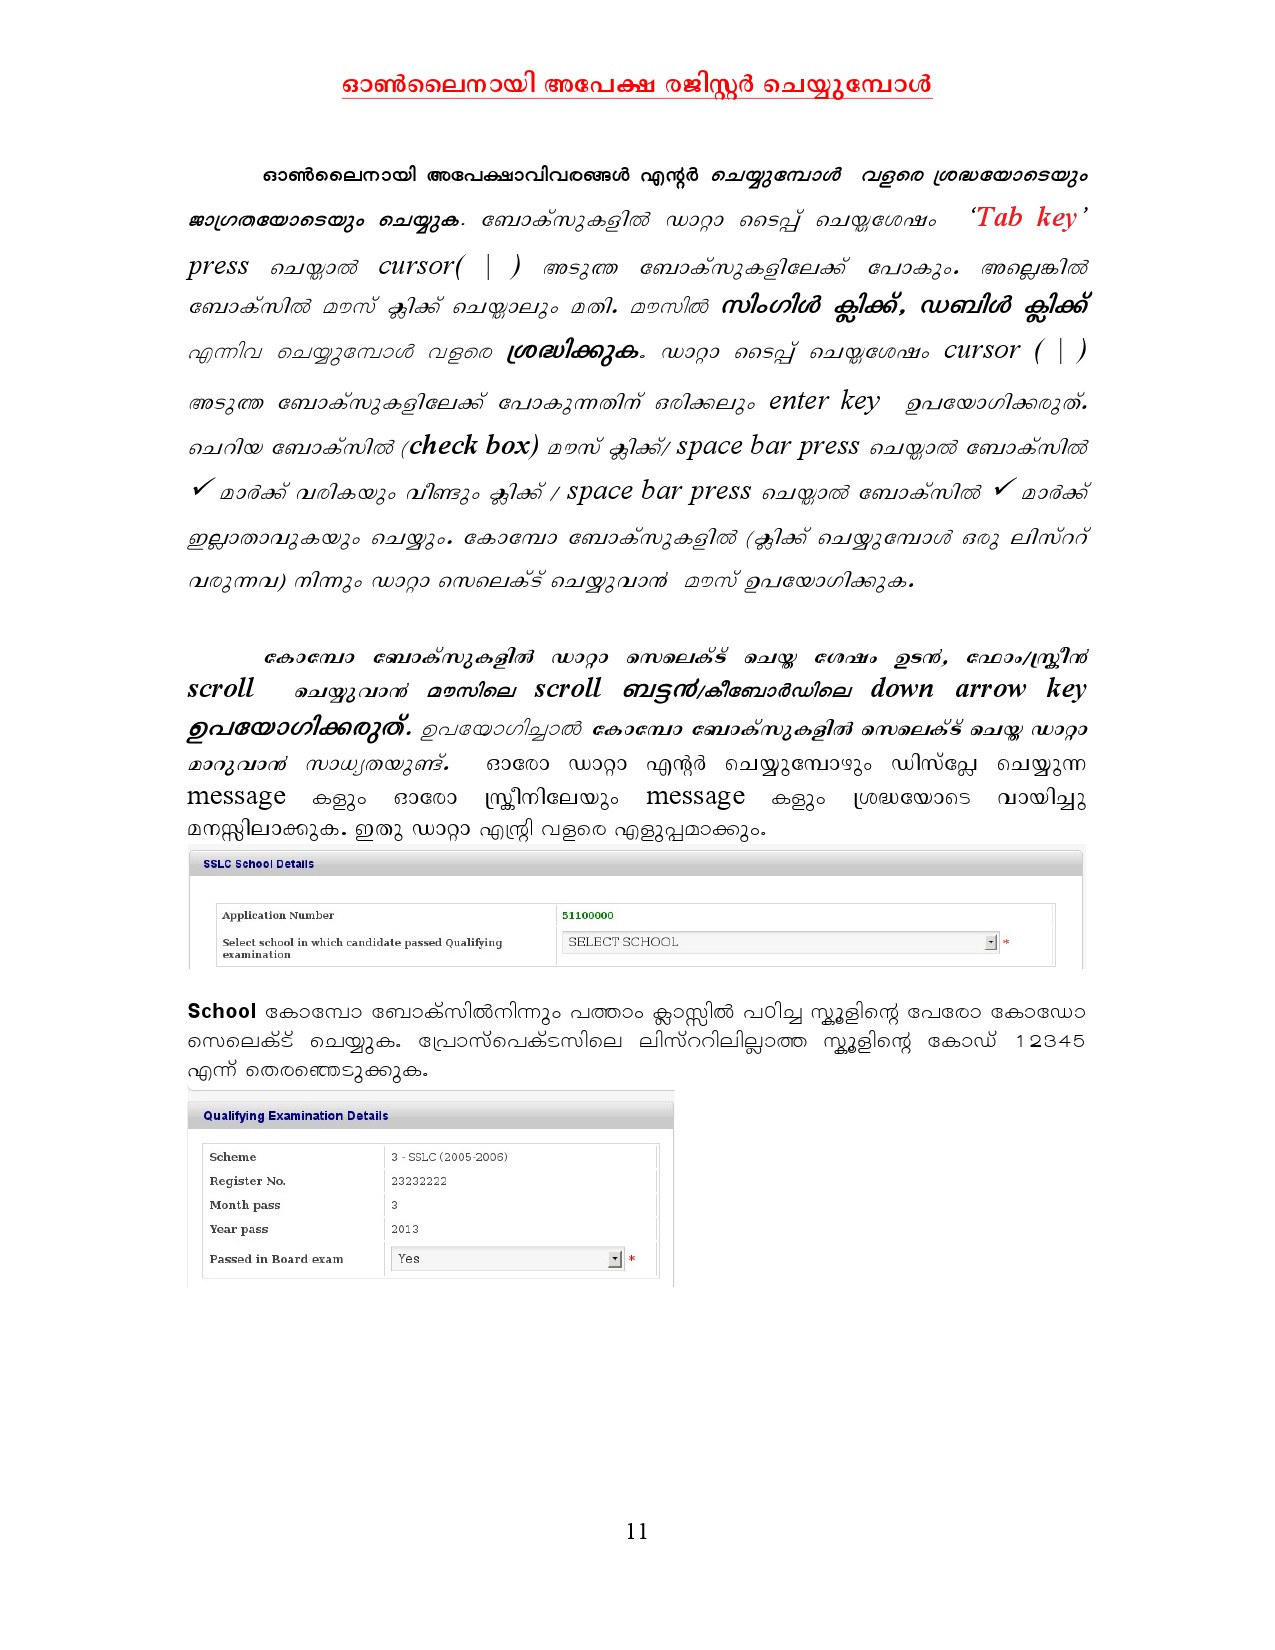 Higher Secondary School Online Application Manual in Malayalam - Notification Image 11